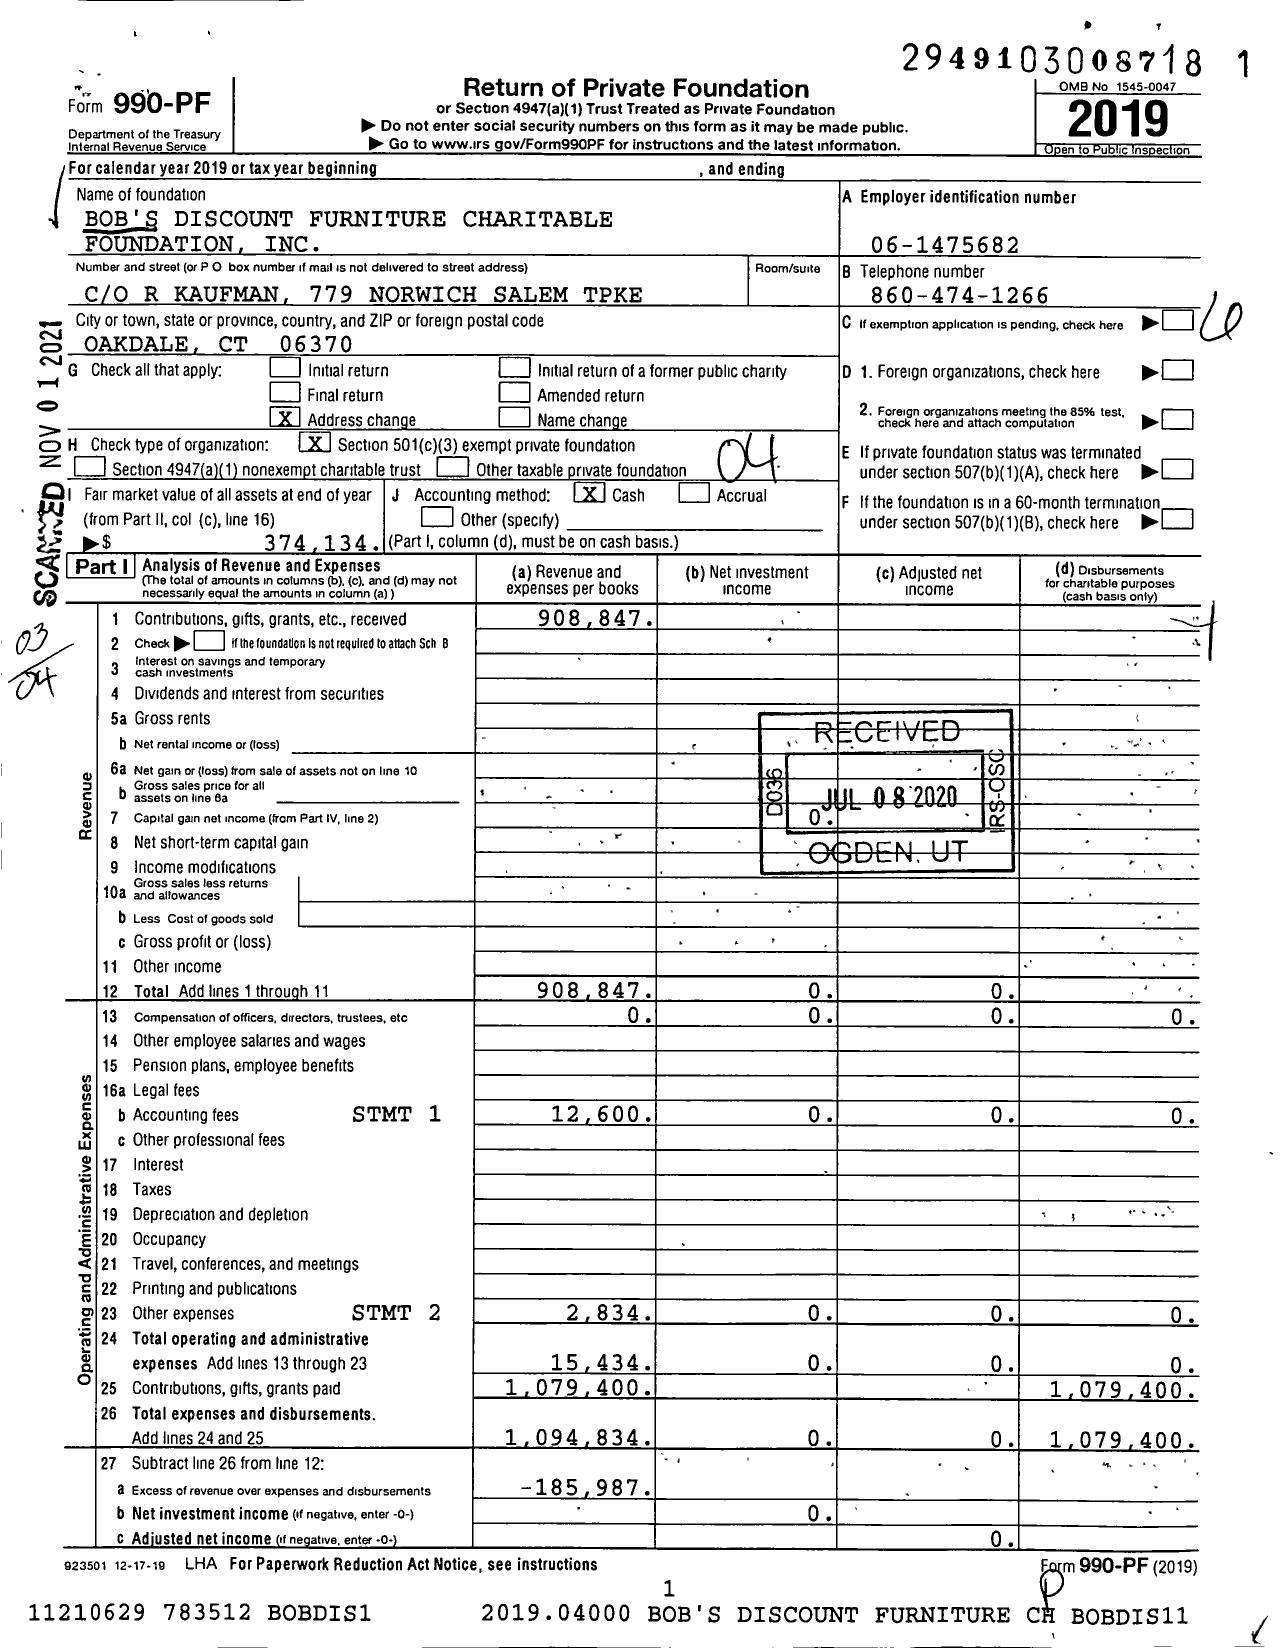 Image of first page of 2019 Form 990PF for Bob's Discount Furniture Charitable Foundation